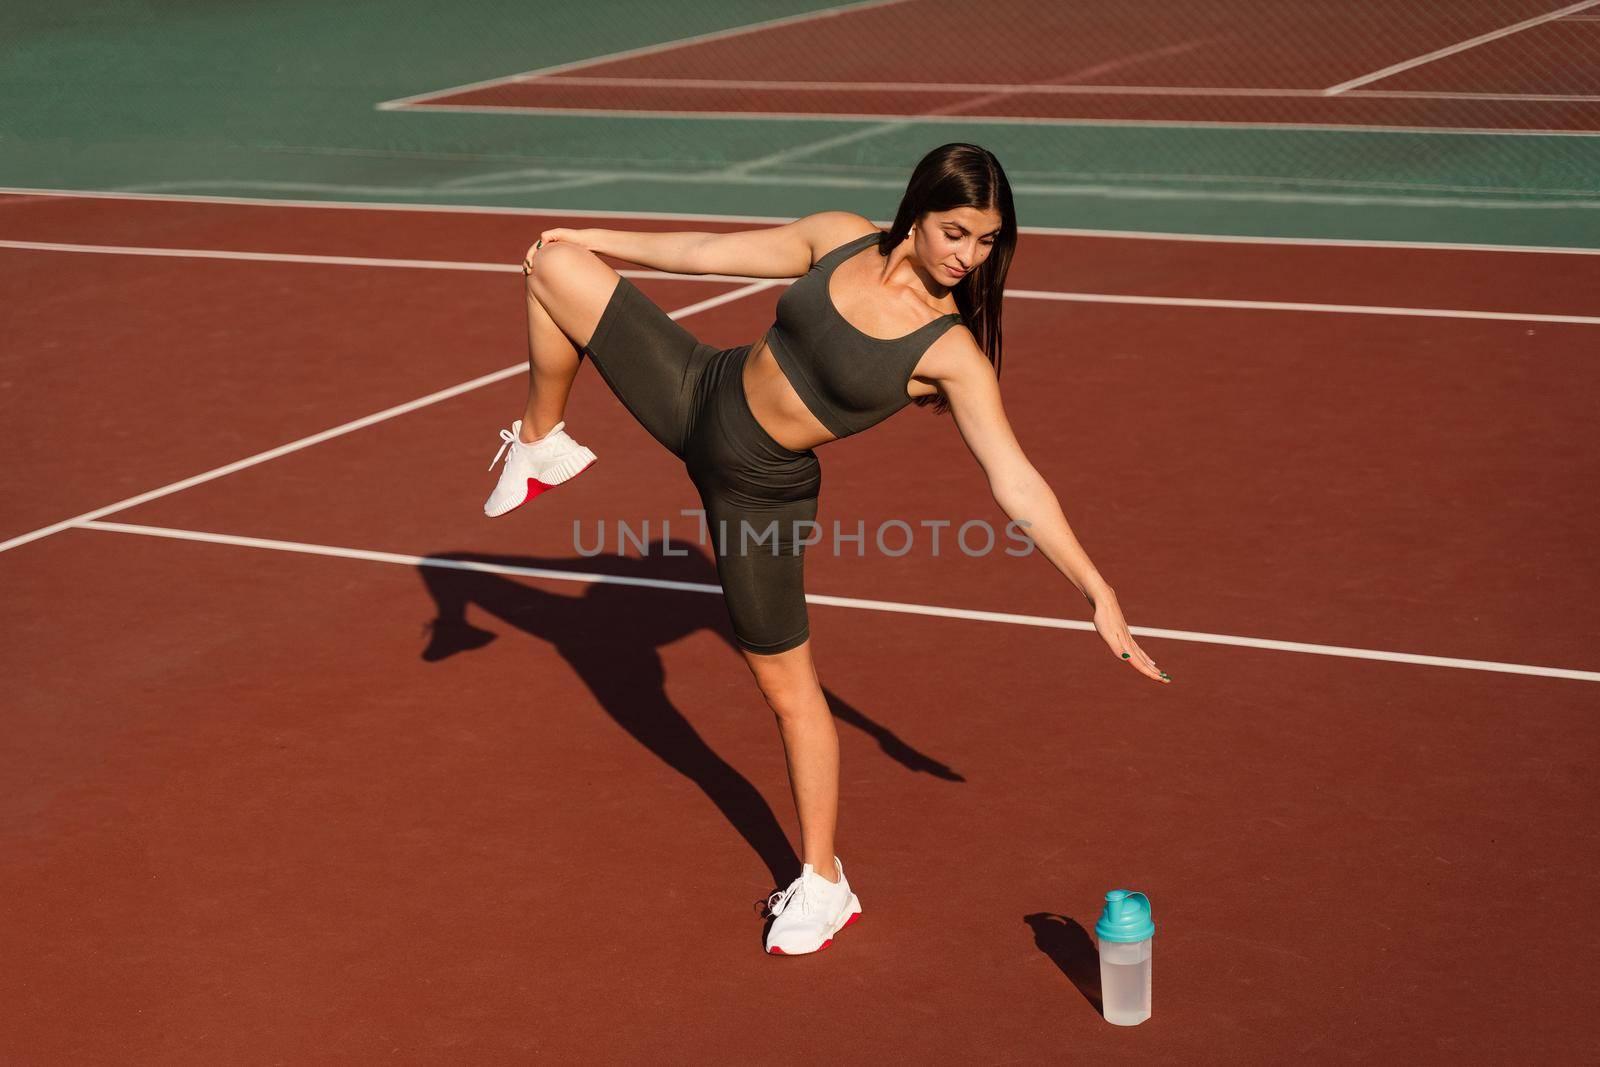 Warm-up and stretching before street workout. Attractive asian girl training on the tennis court